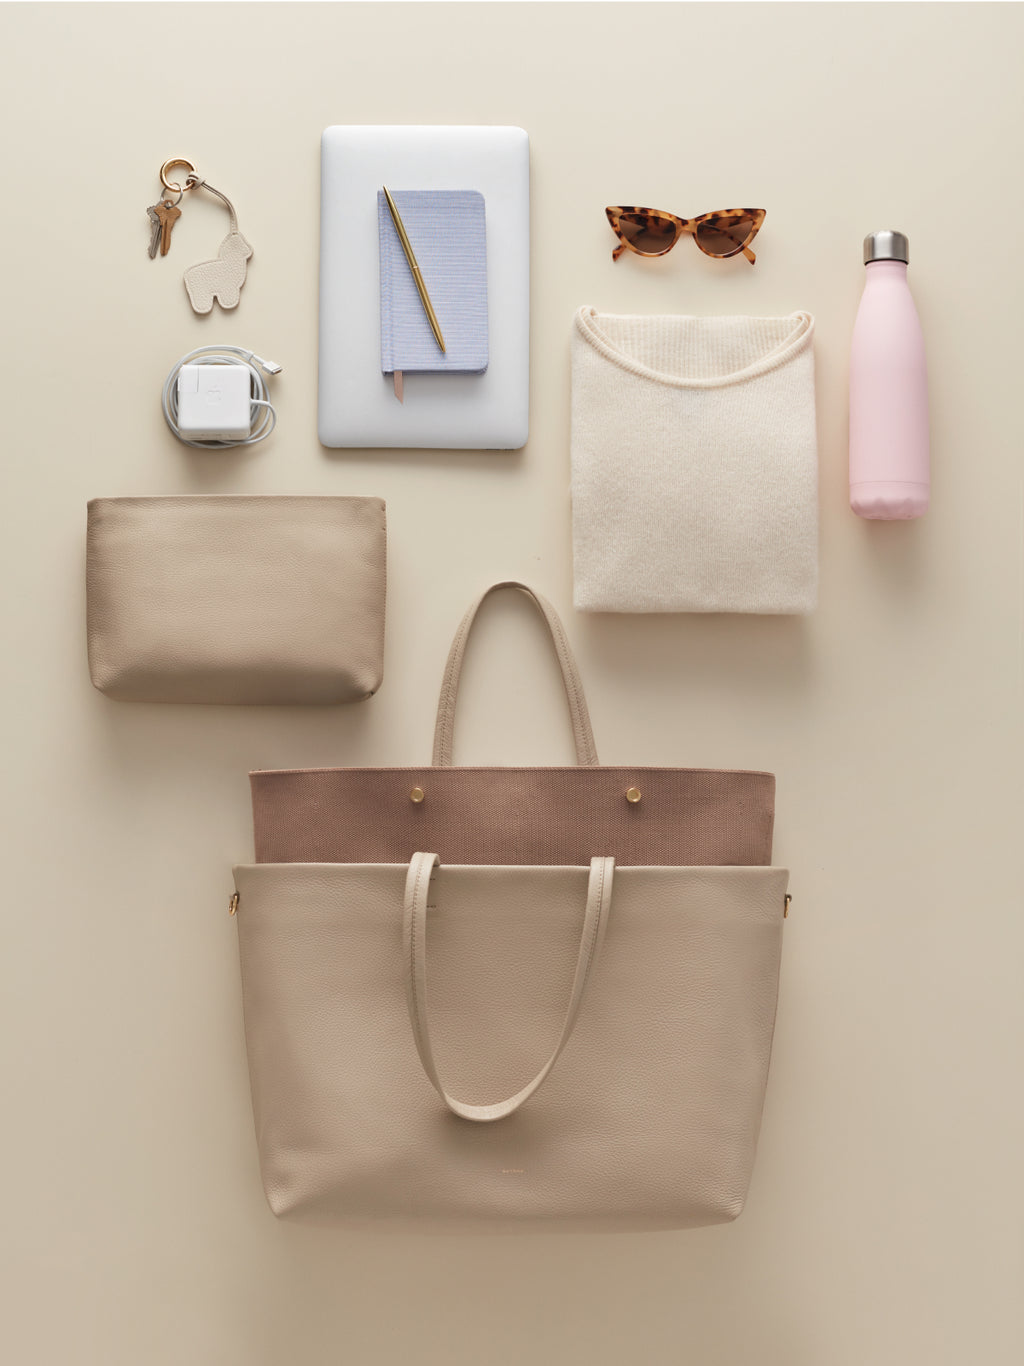 Tote Insert, Leather Accessories